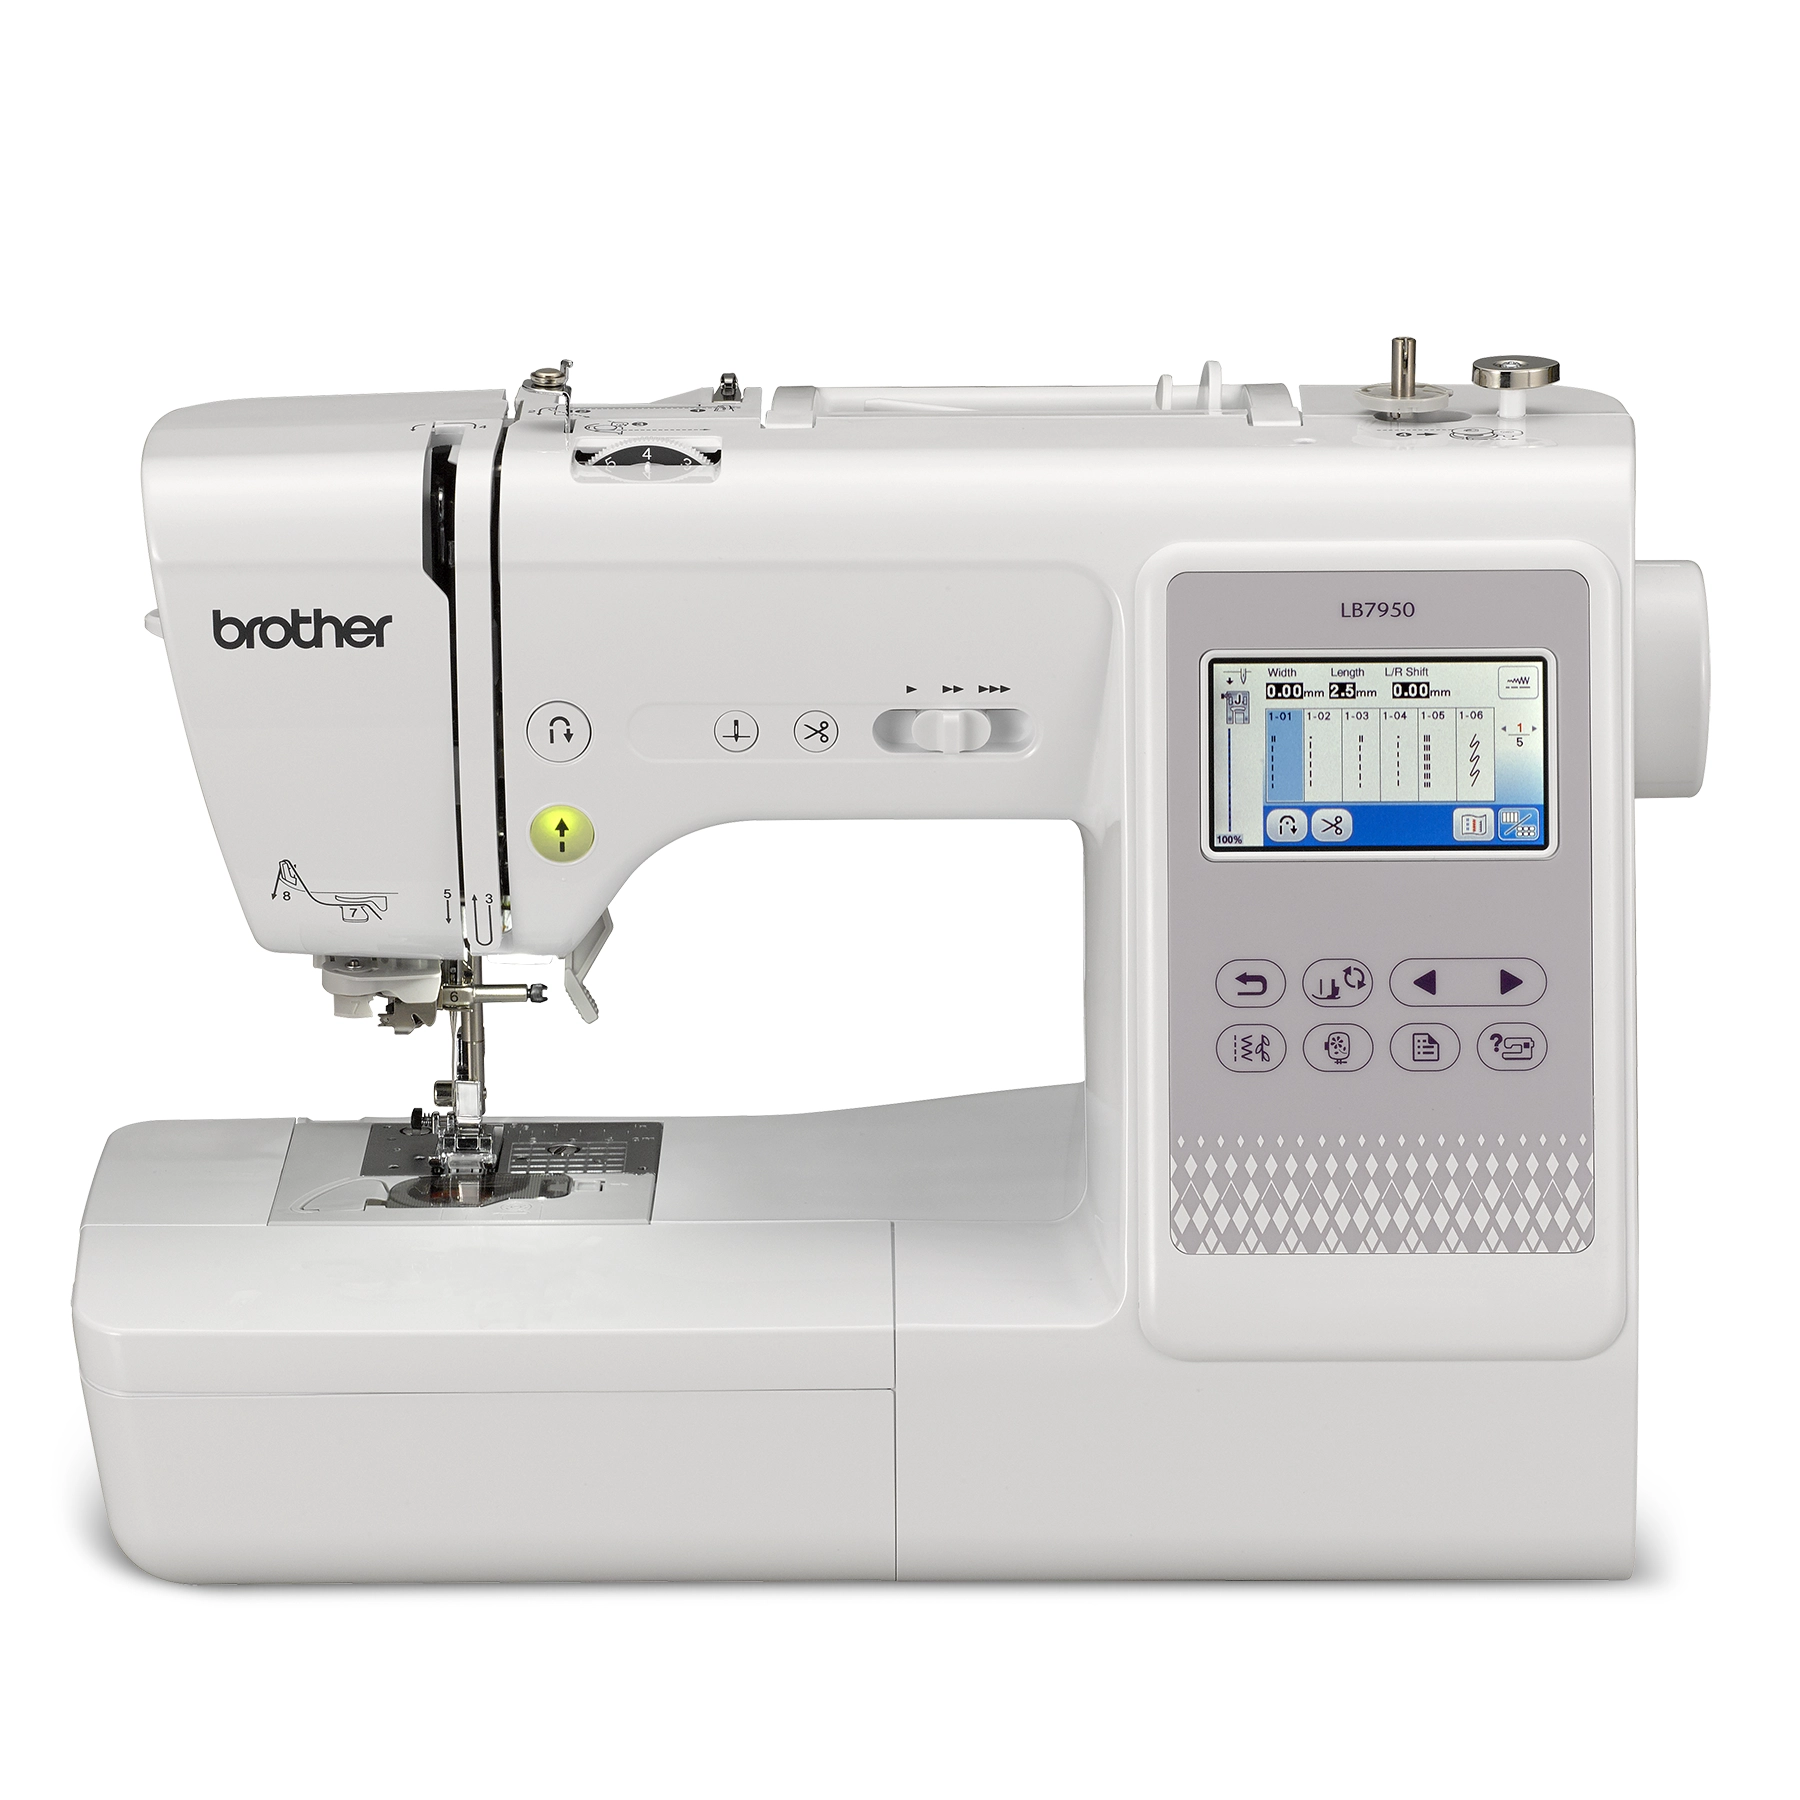 Image of Brother LB7950 Sewing & Embroidery Machine